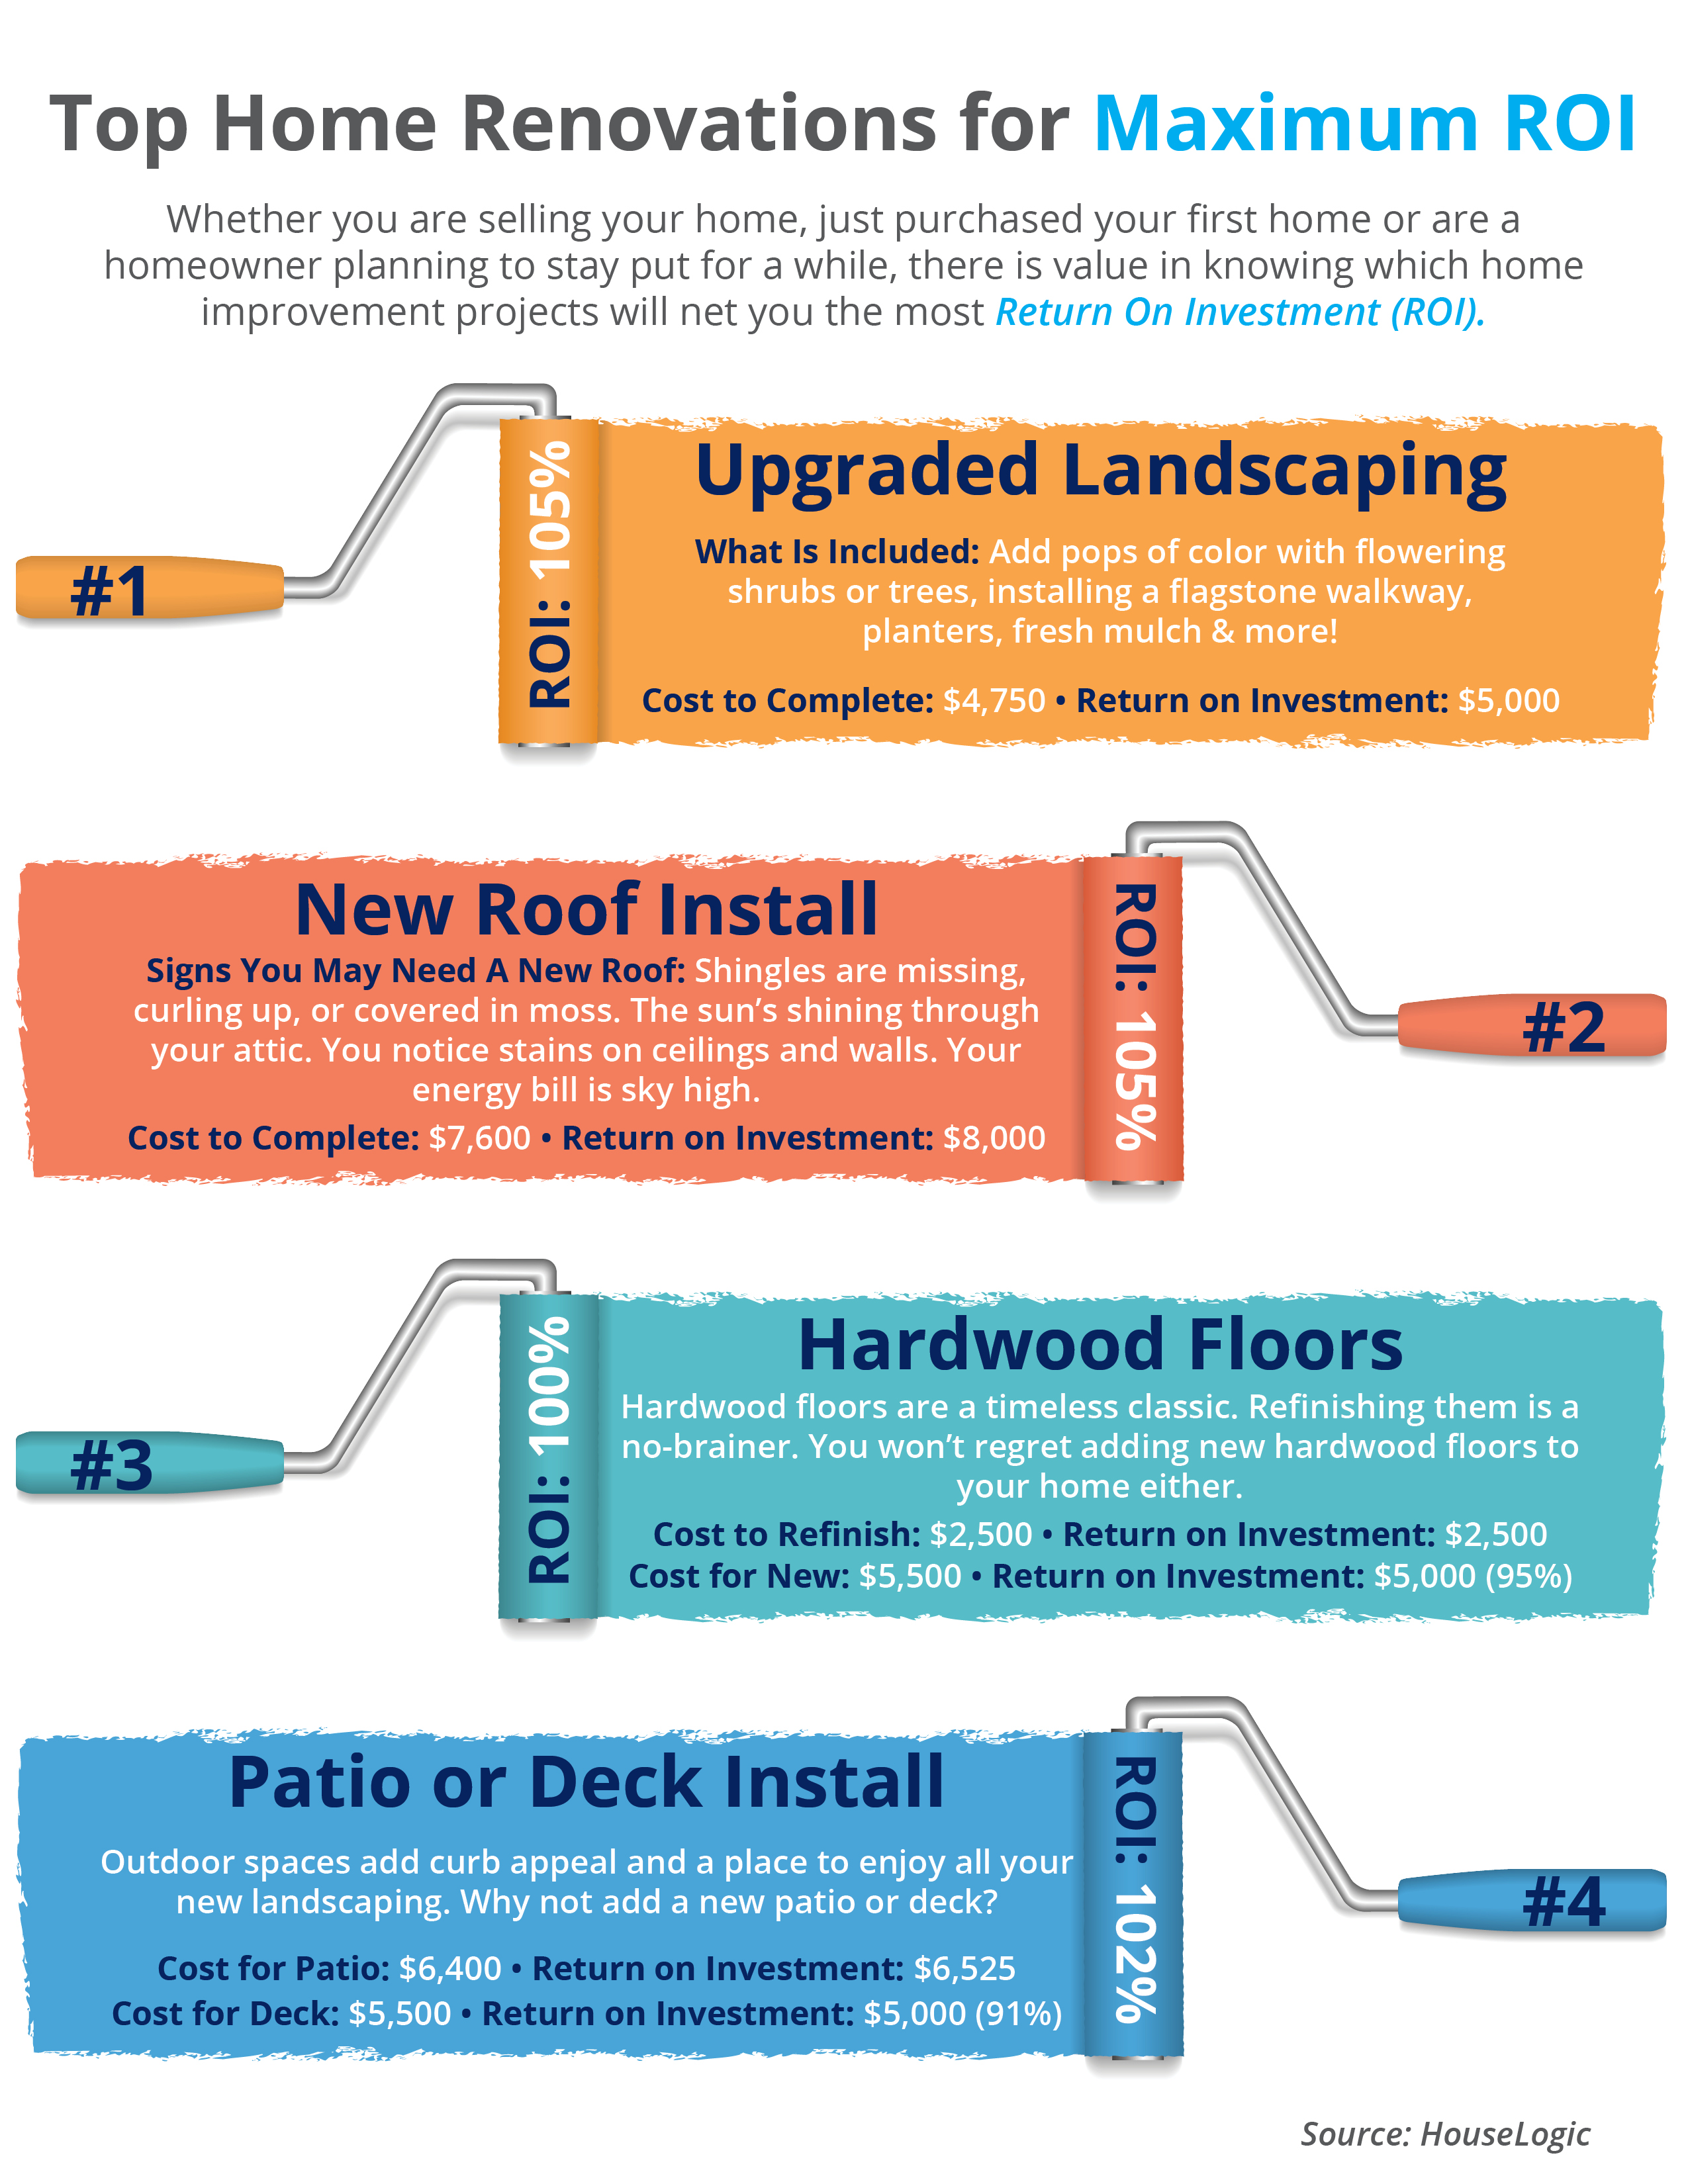 Top 4 Home Renovations for Maximum ROI [INFOGRAPHIC] | Simplifying The Market